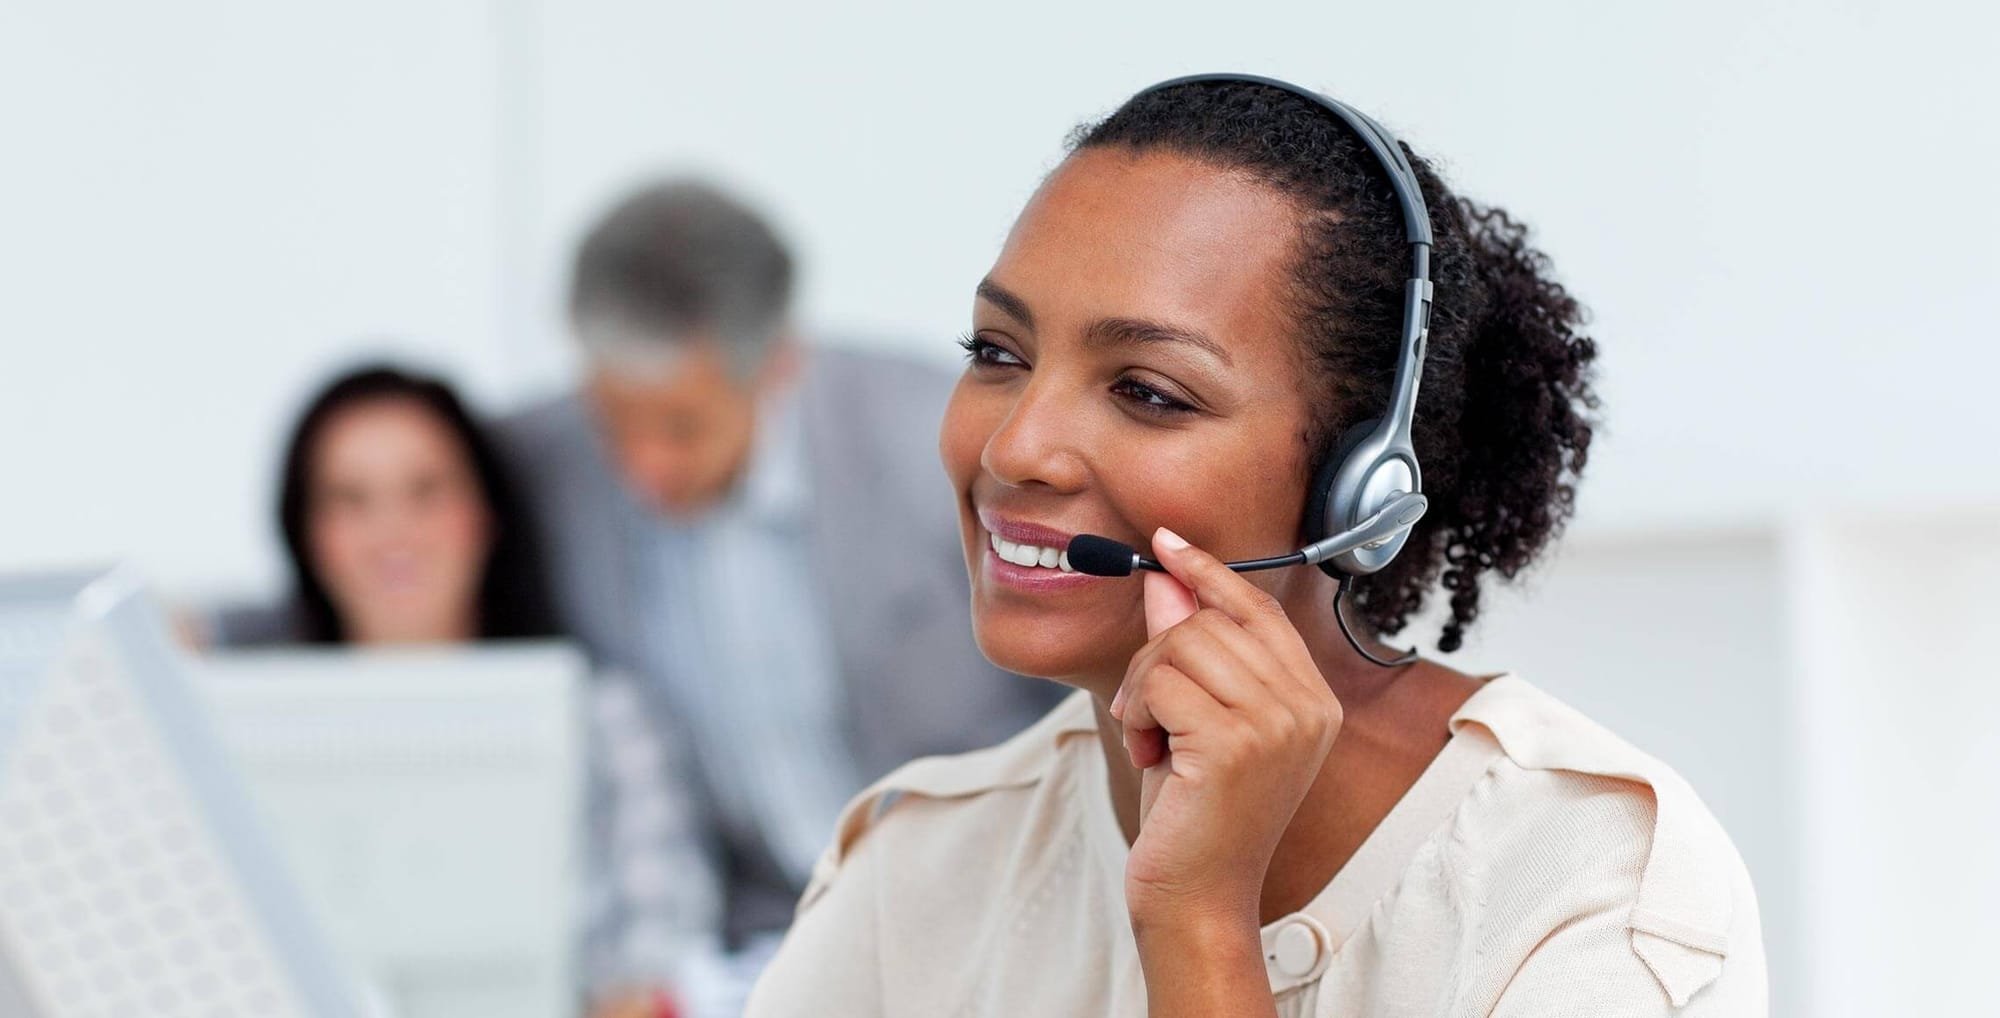 Four compelling reasons for leveraging contact centers to optimize the customer experience